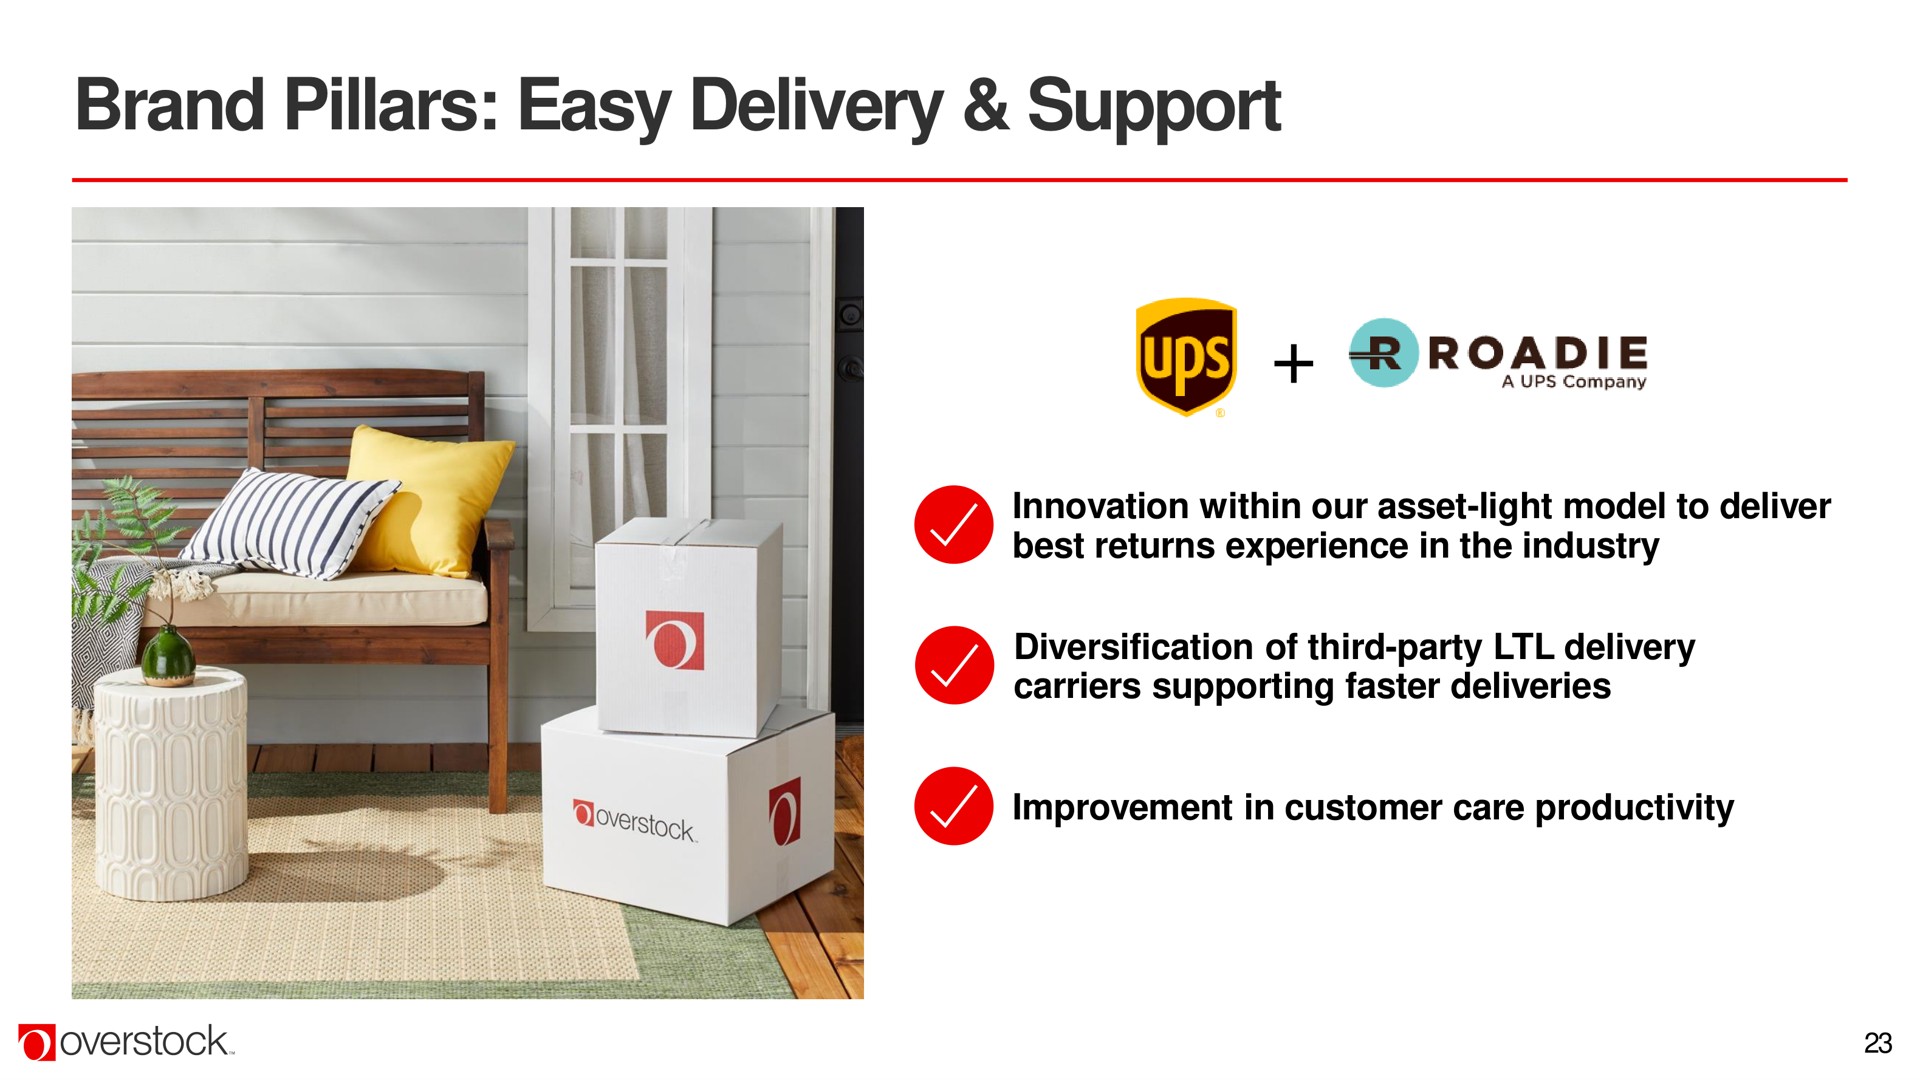 brand pillars easy delivery support ups | Overstock